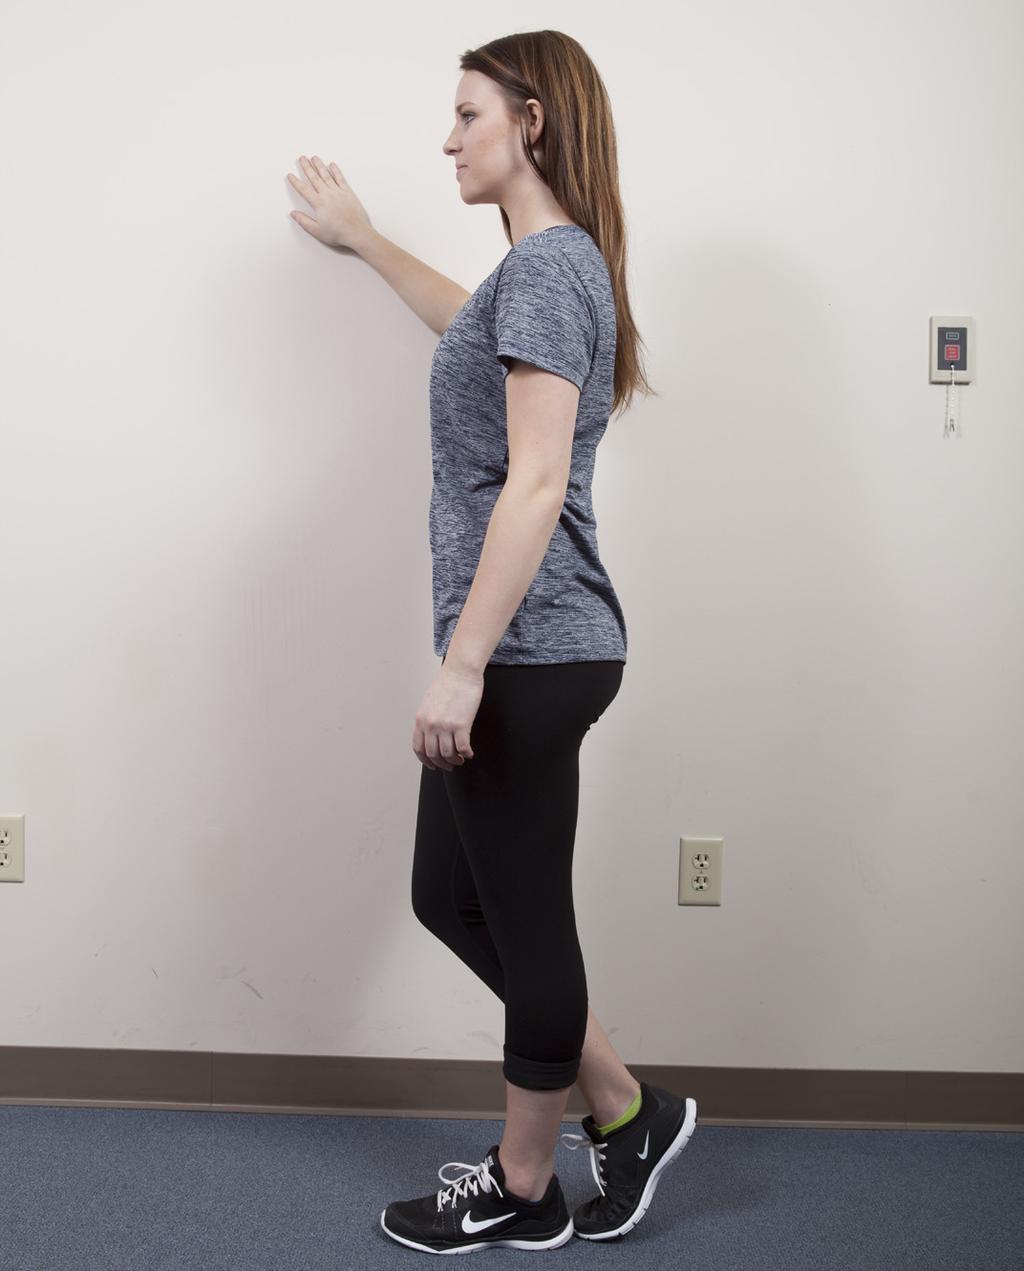 Tandem walk: Stand sideways next to a wall for support. Place one hand on the wall for support if needed. Keep your stomach muscles tight and your chin tucked in.